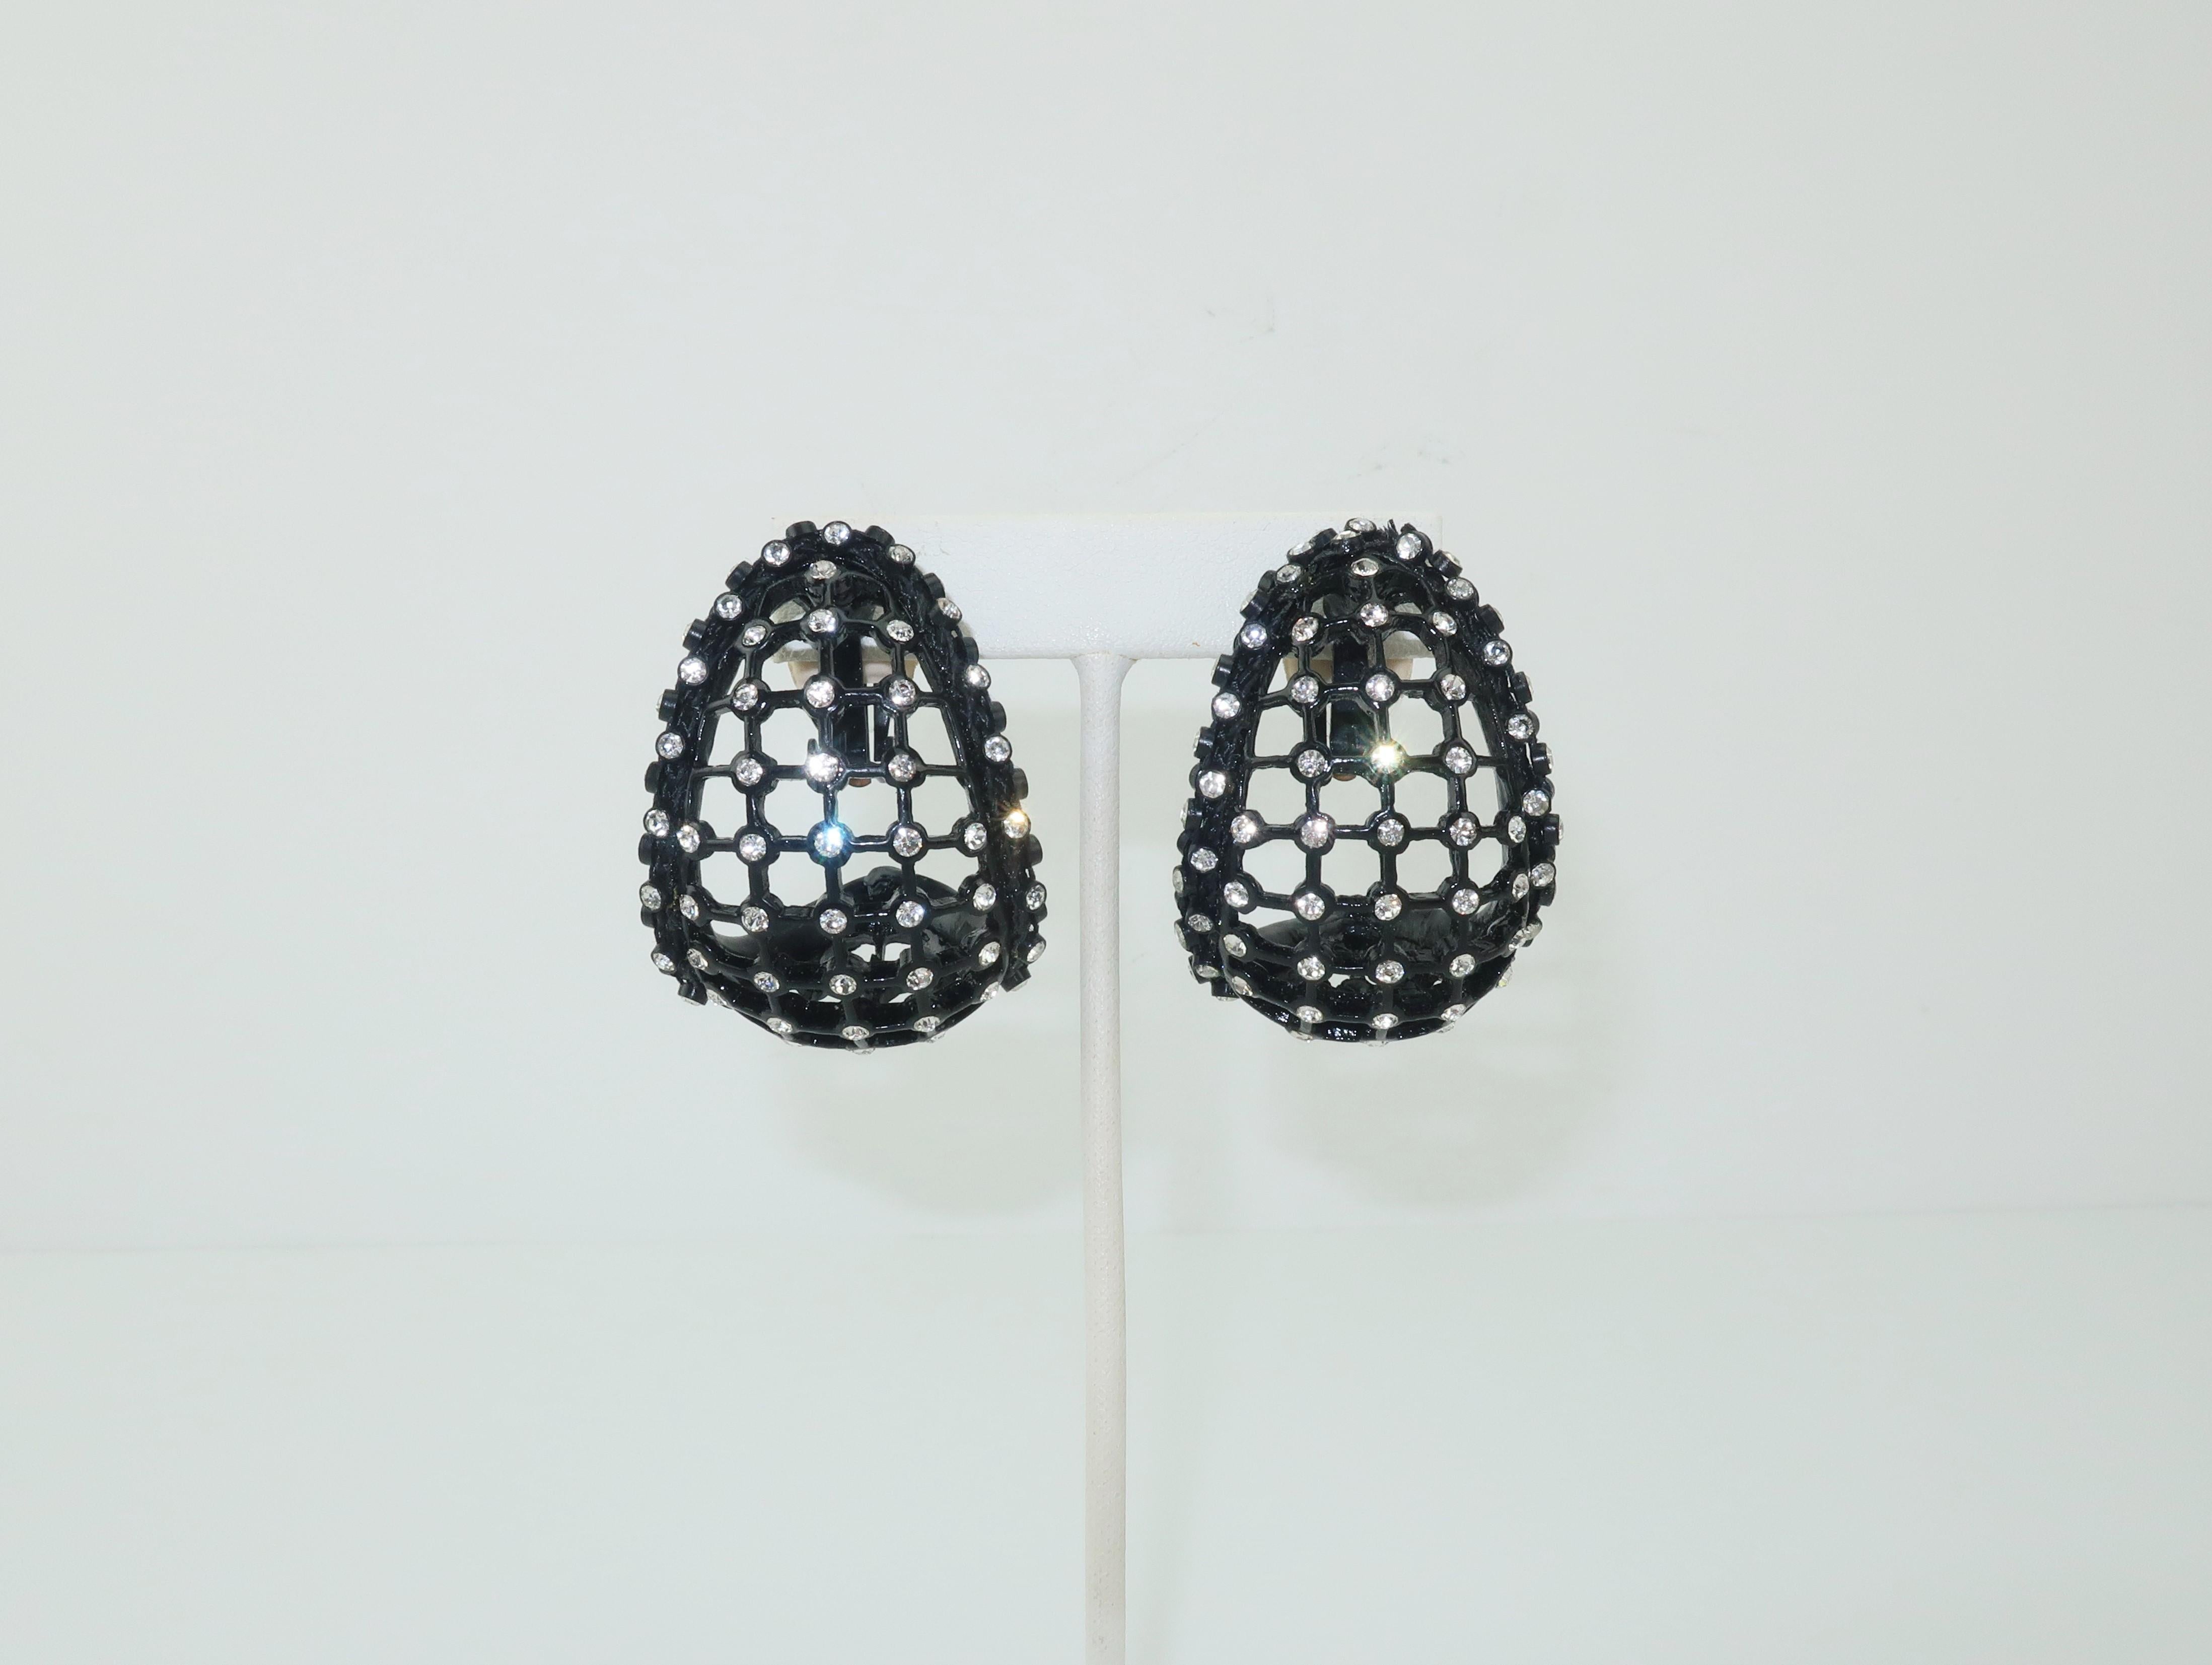 1980's black metal clip on earrings with a scoop style silhouette and a grid cage-like construction accented by rhinestones.  A fun and fashionable accessory to add a little sparkle to your look.  Good condition with slip on pads added by the